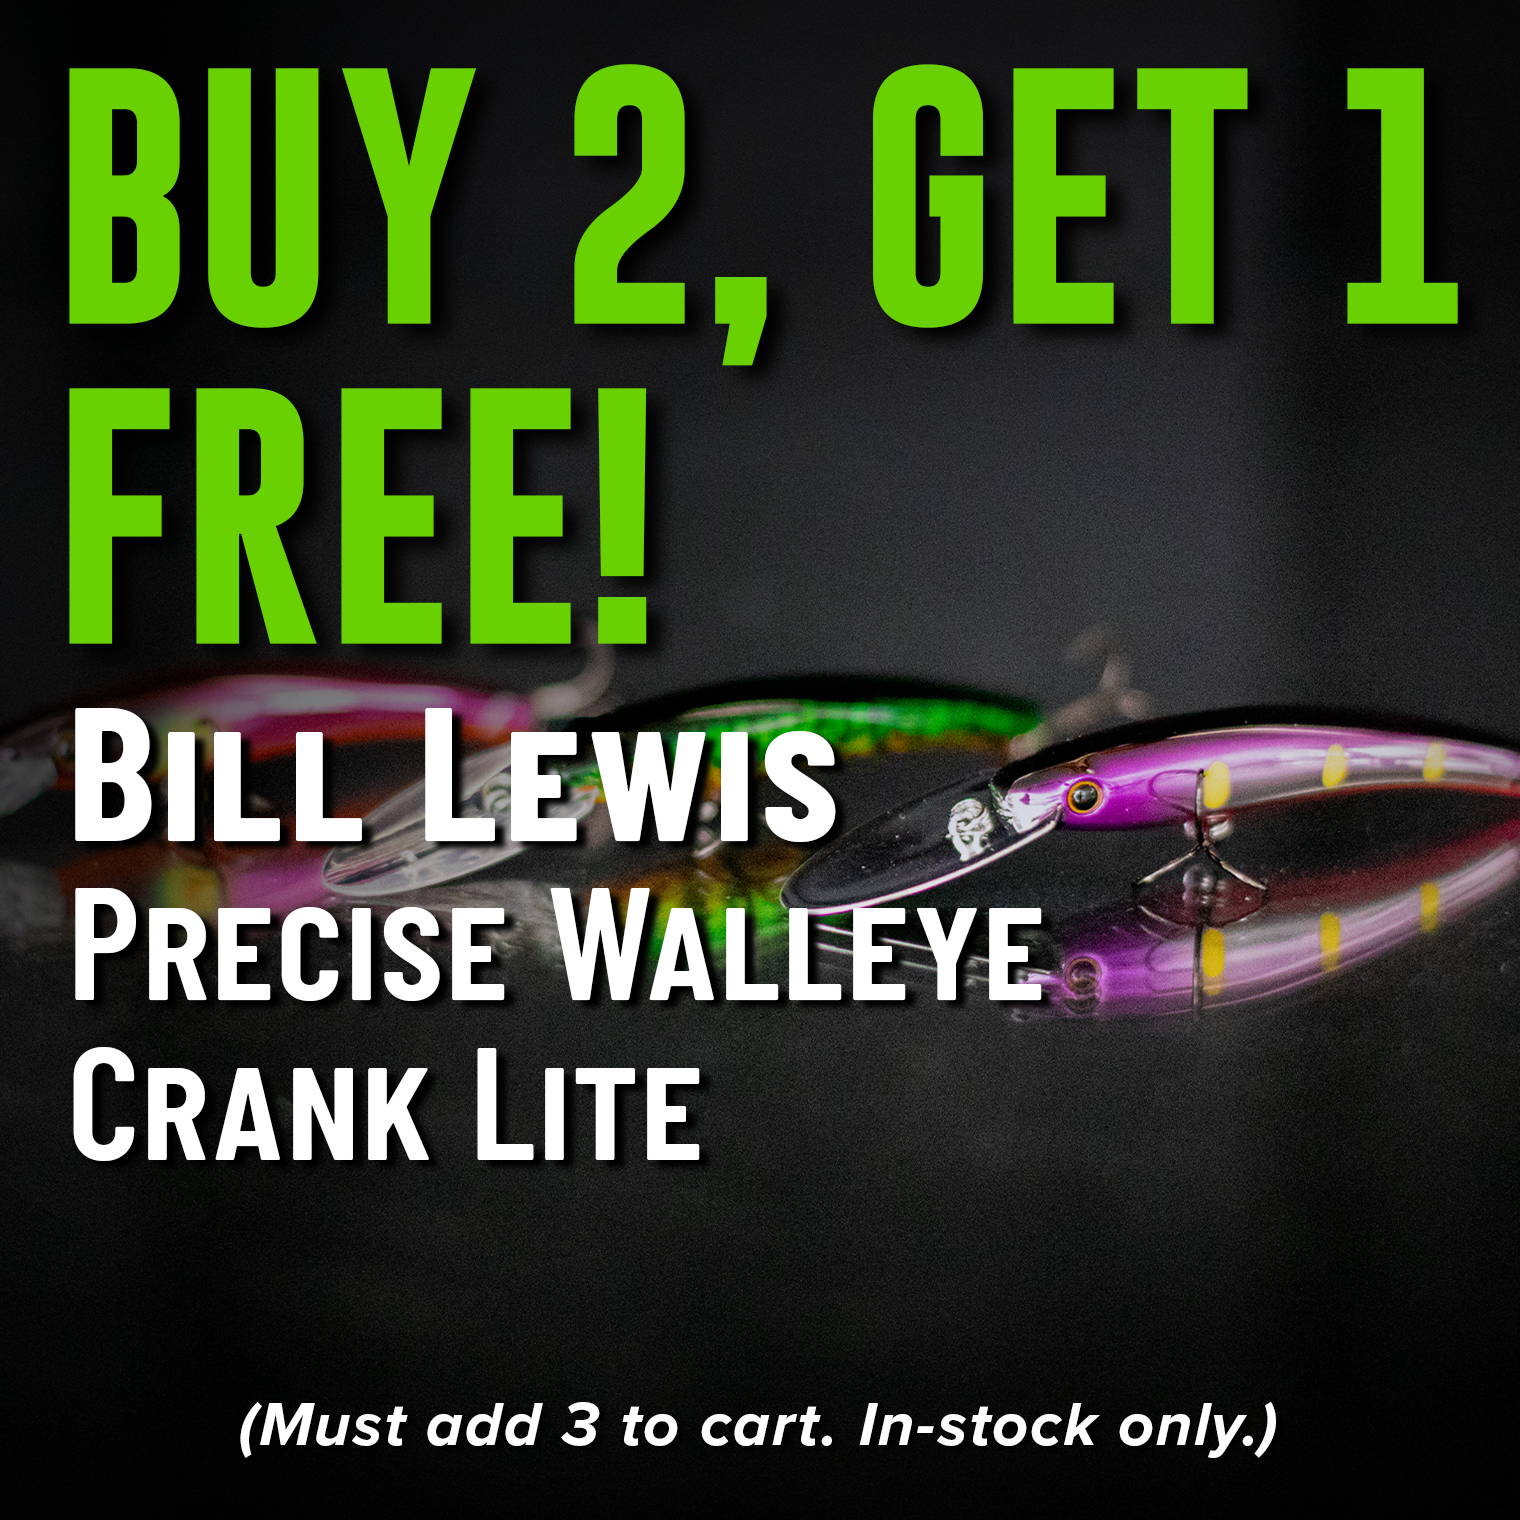 Buy 2, Get 1 Free! Bill Lewis Precise Walleye Crank Lite (Must add 3 to cart. In-stock only.)